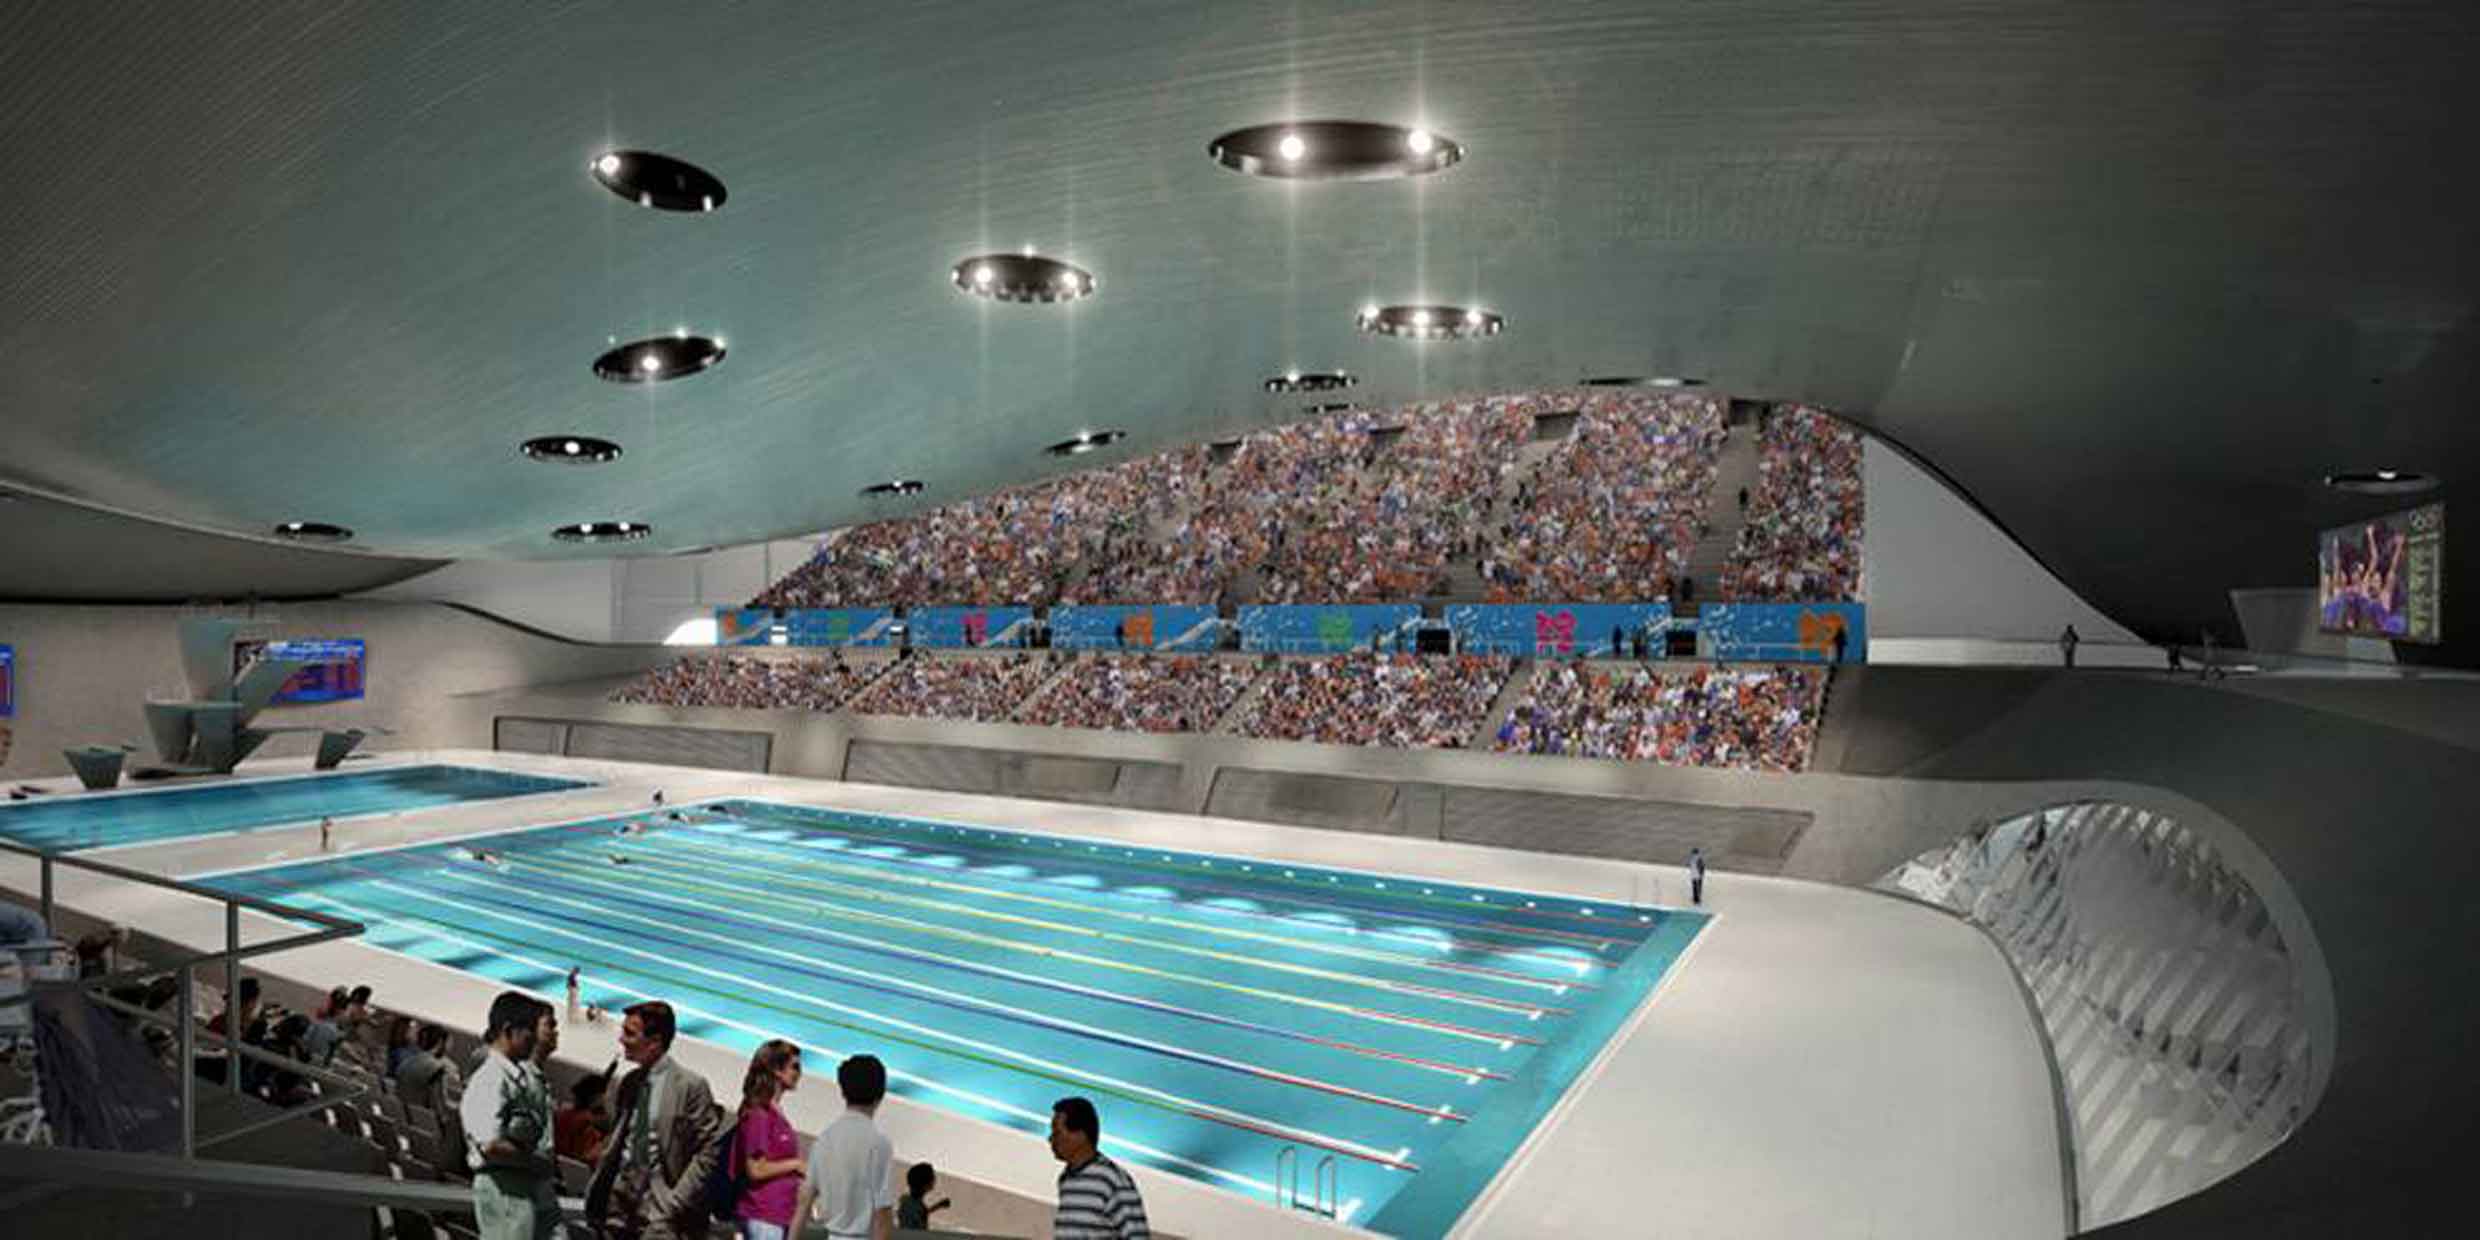 A new managerial position is being advertised to manage the post-Olympic development at the London Aquatics Centre